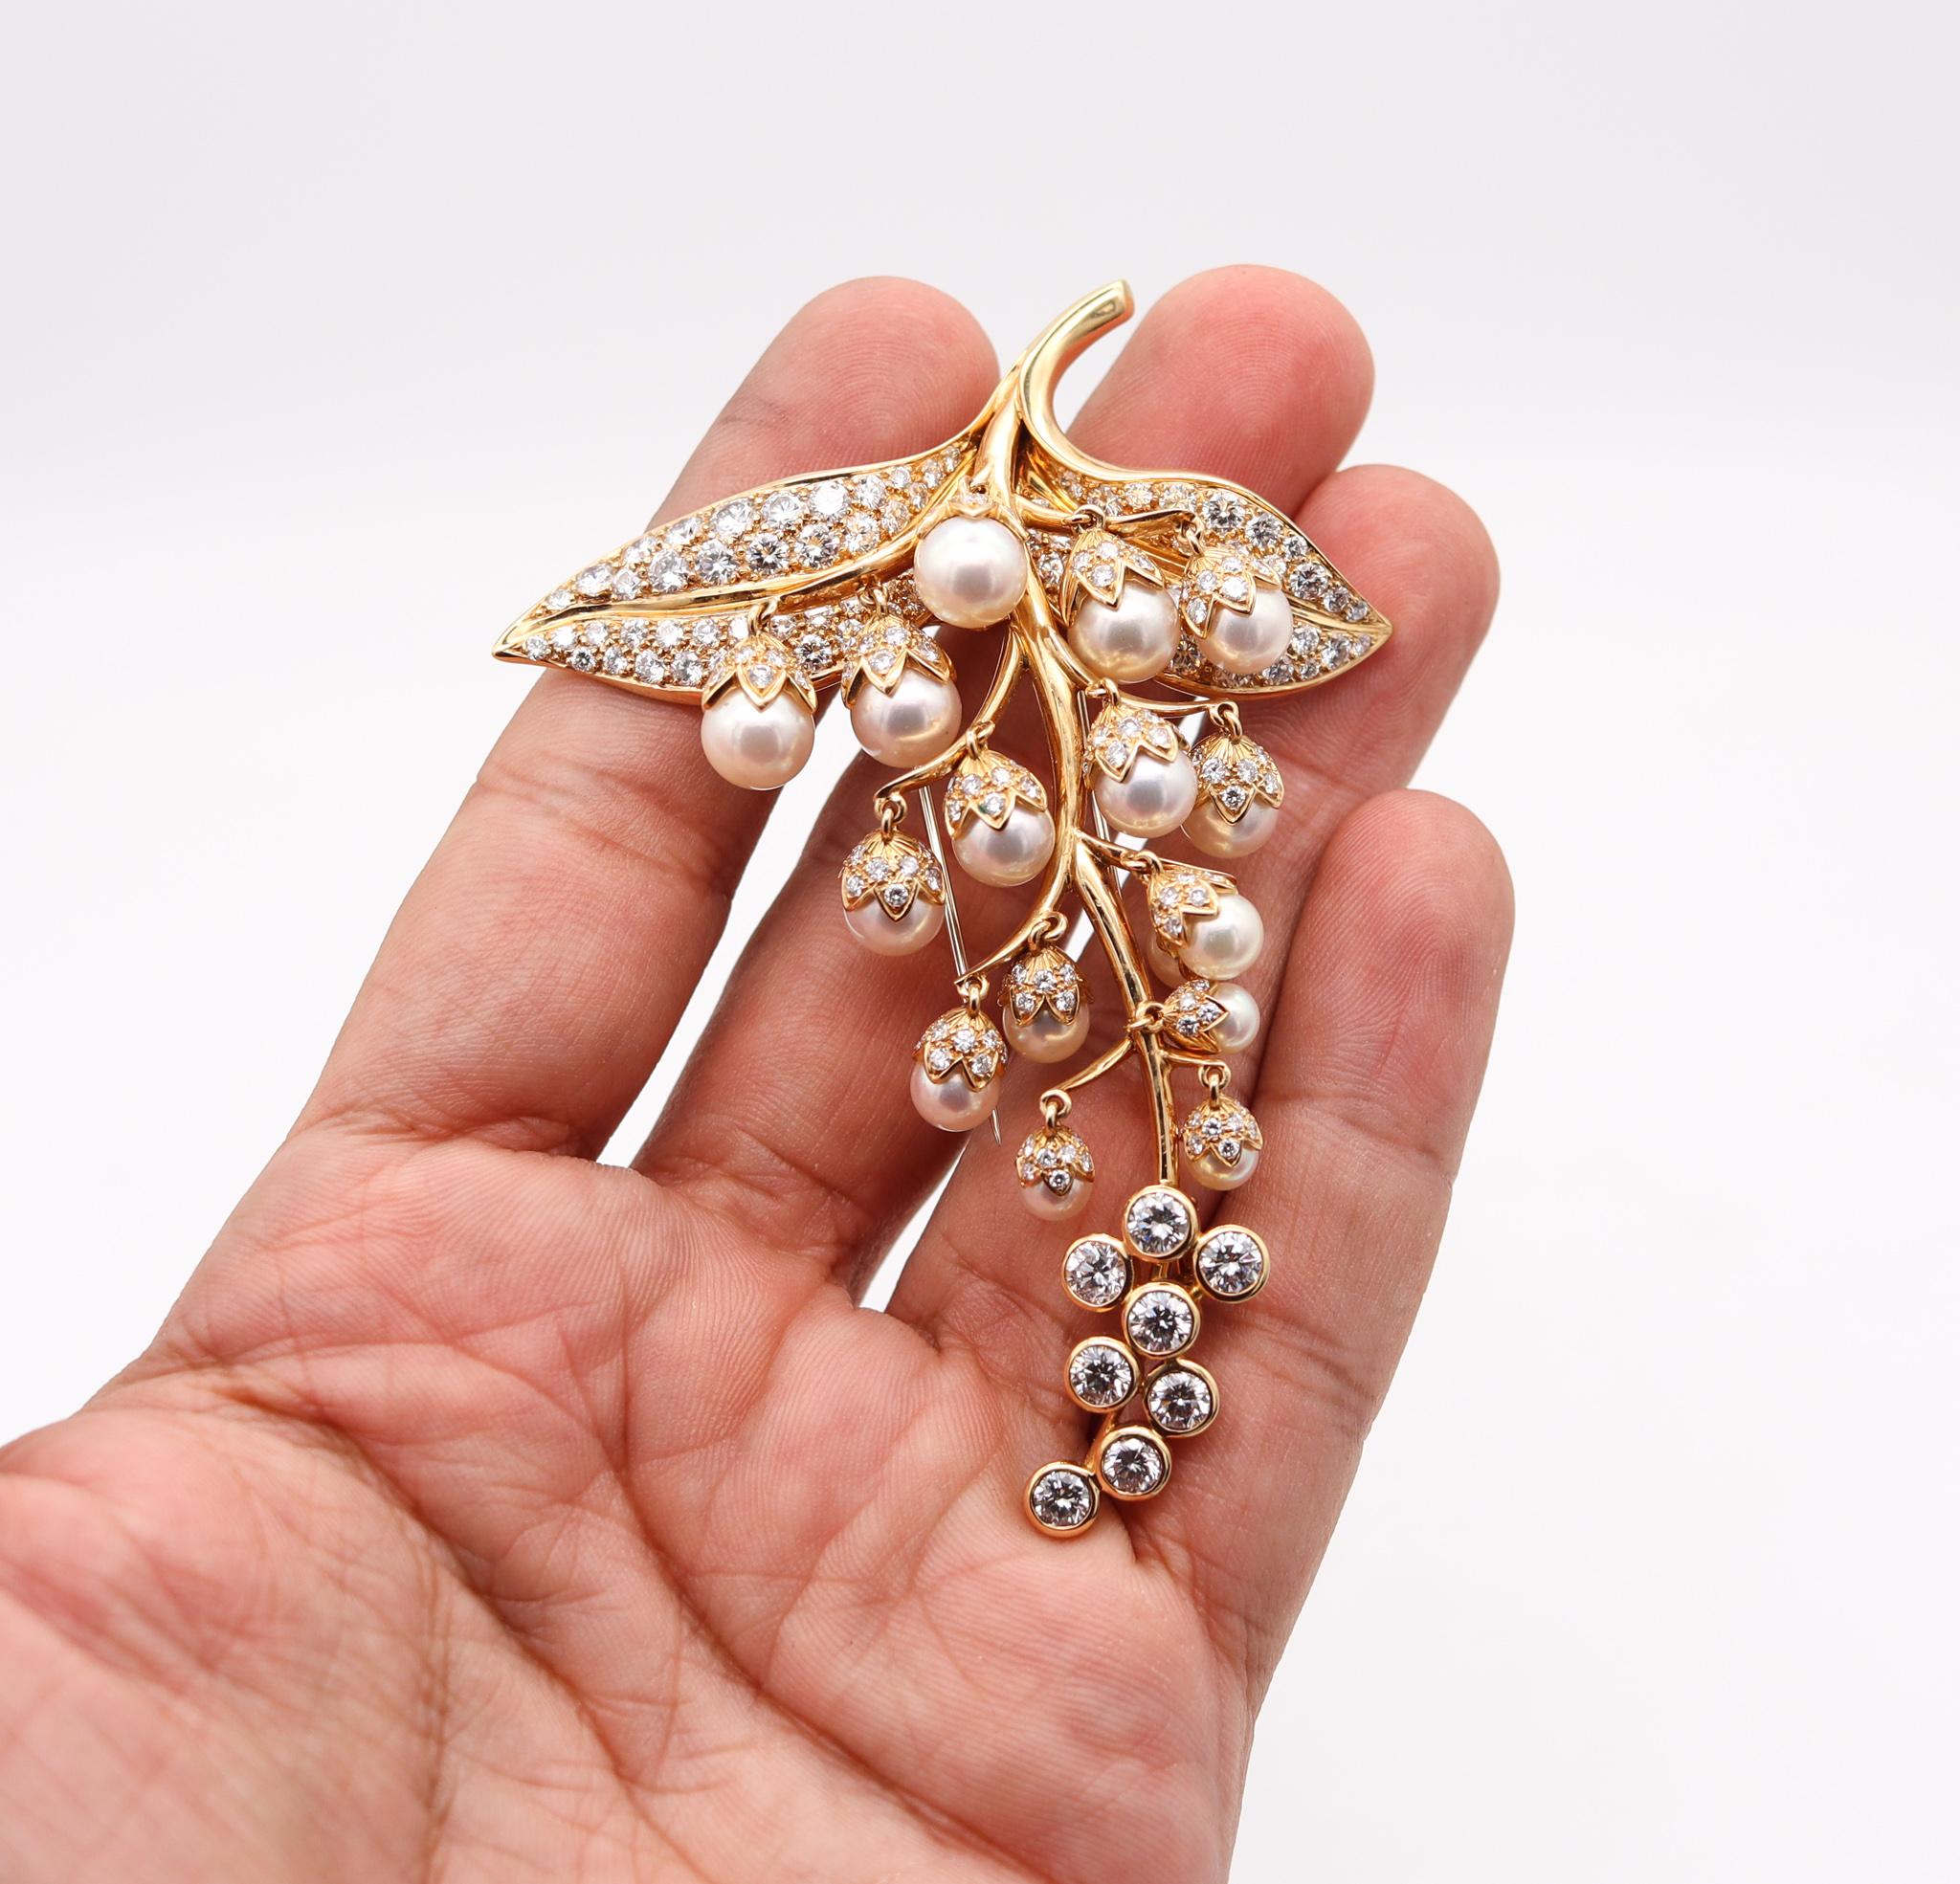 Rene Boivin Paris Gem Set Brooch 18kt Gold with 14.09ctw in Diamonds and Pearls In Excellent Condition For Sale In Miami, FL